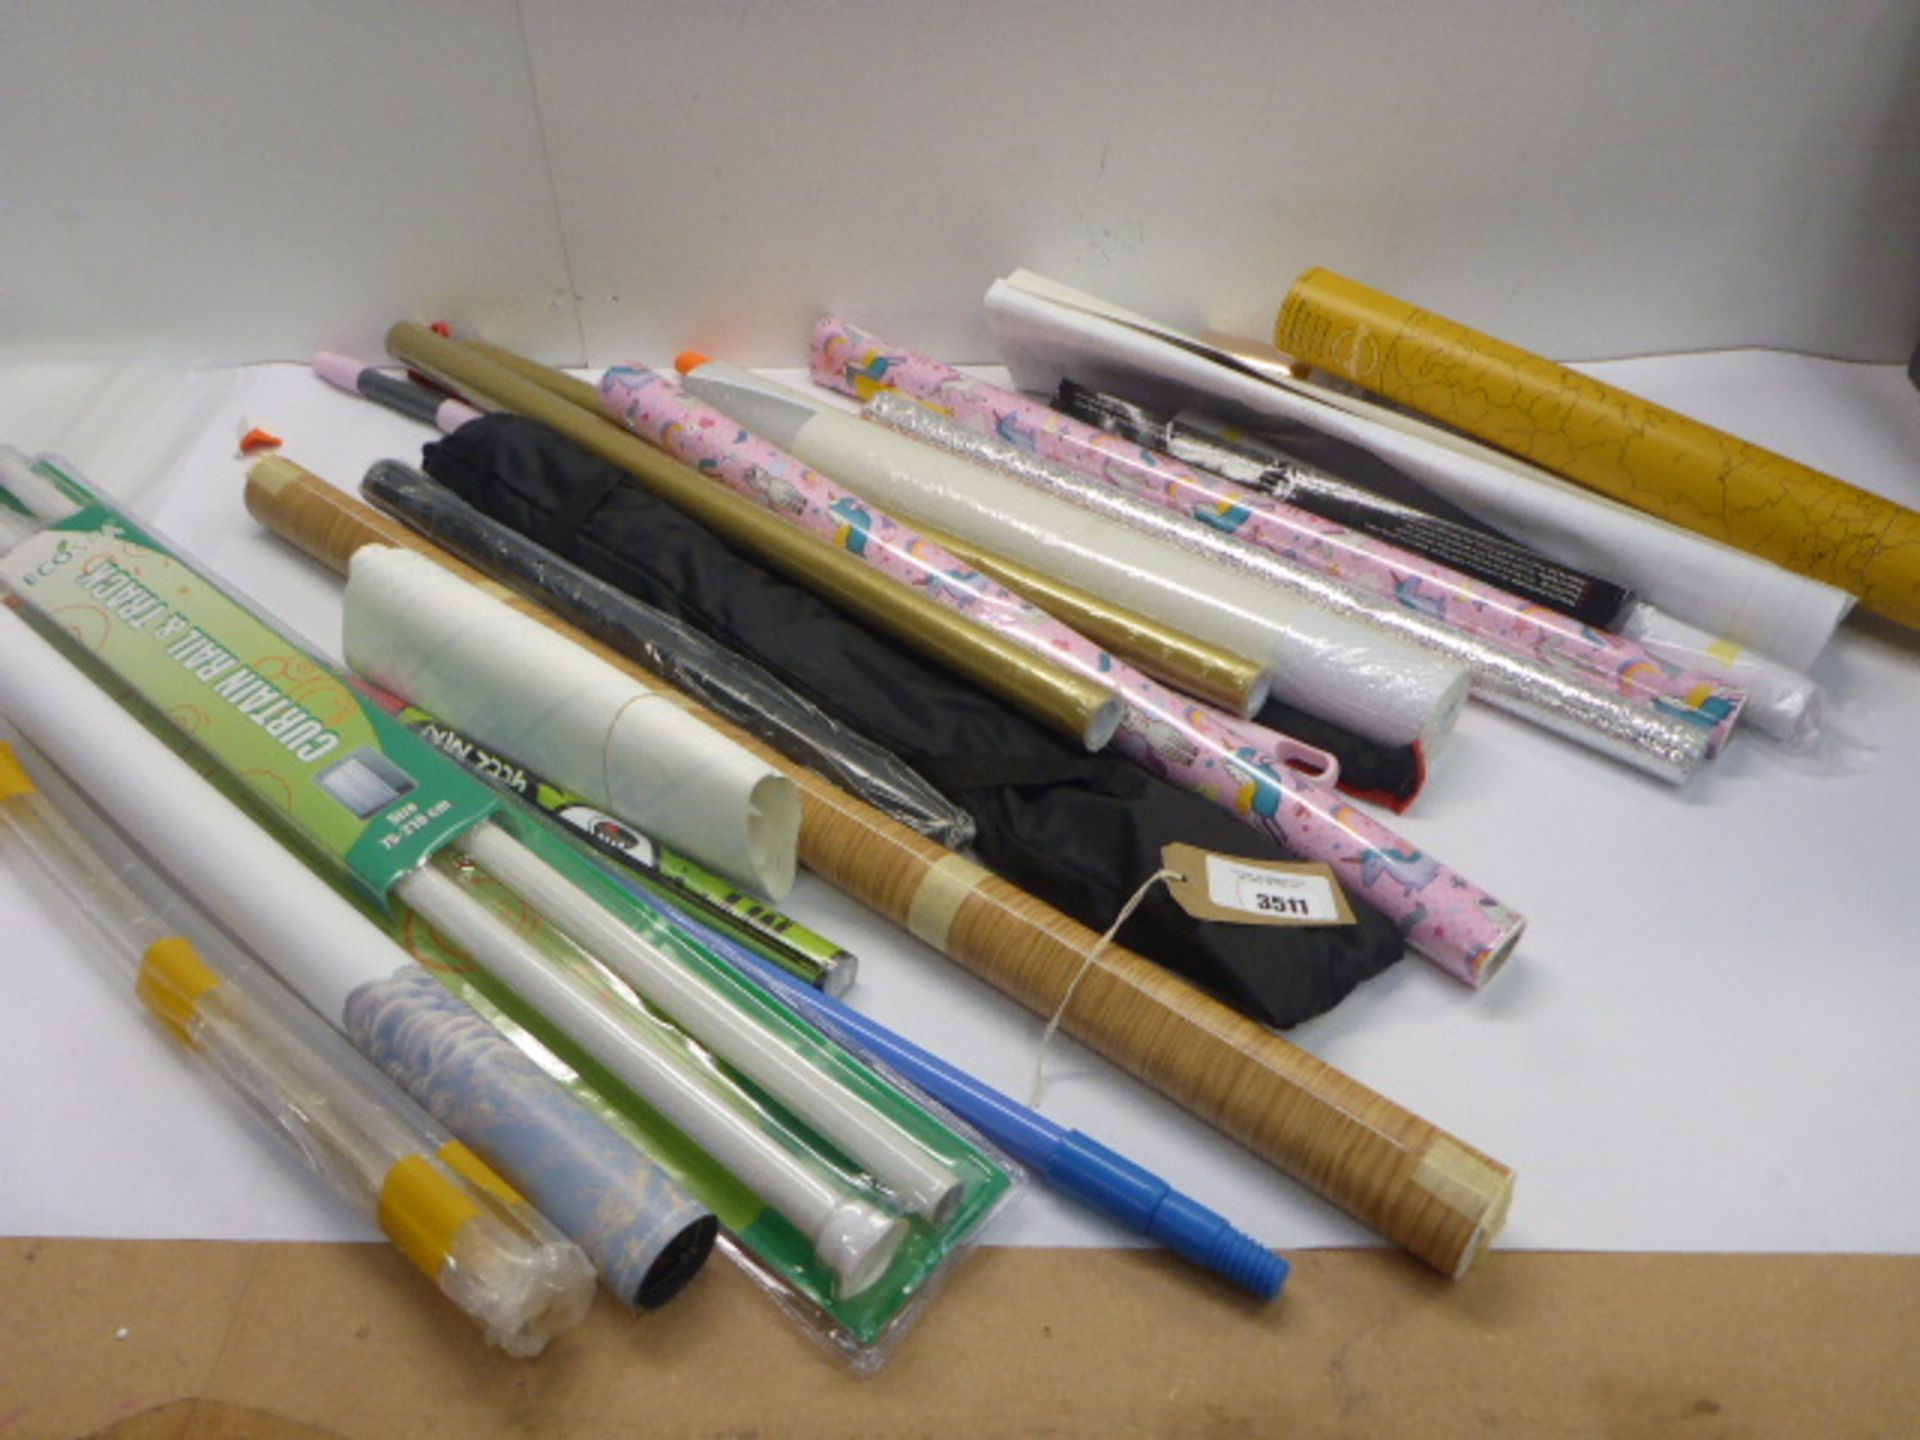 Gift wrap, scratch map, curtain rail & track, feathers, tripod, sticky back plastic, broom handles